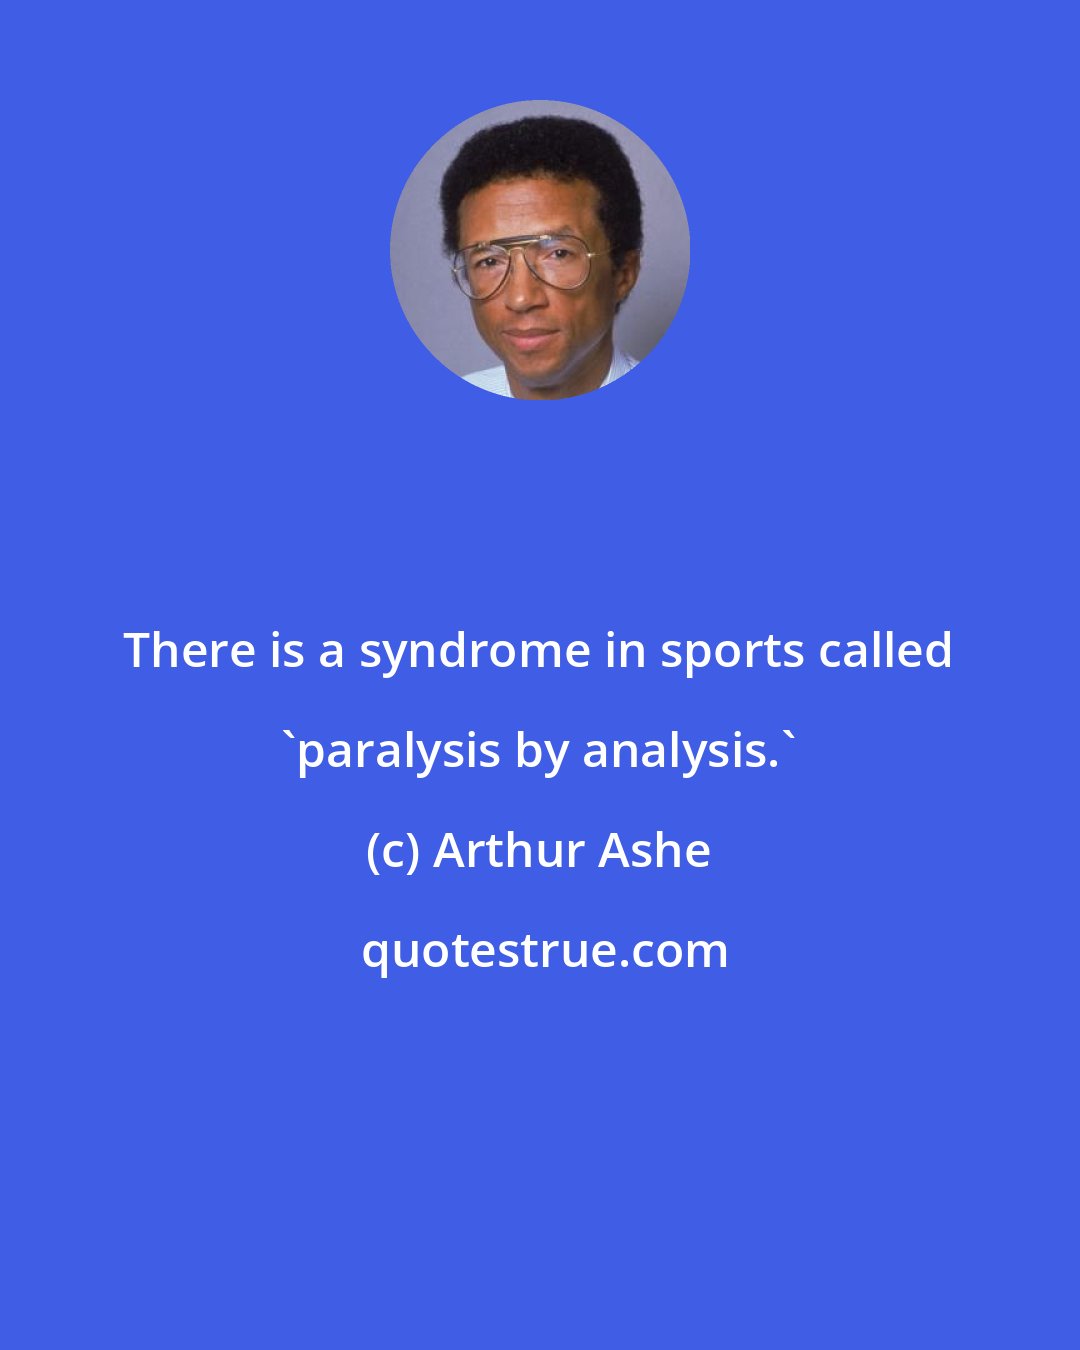 Arthur Ashe: There is a syndrome in sports called 'paralysis by analysis.'